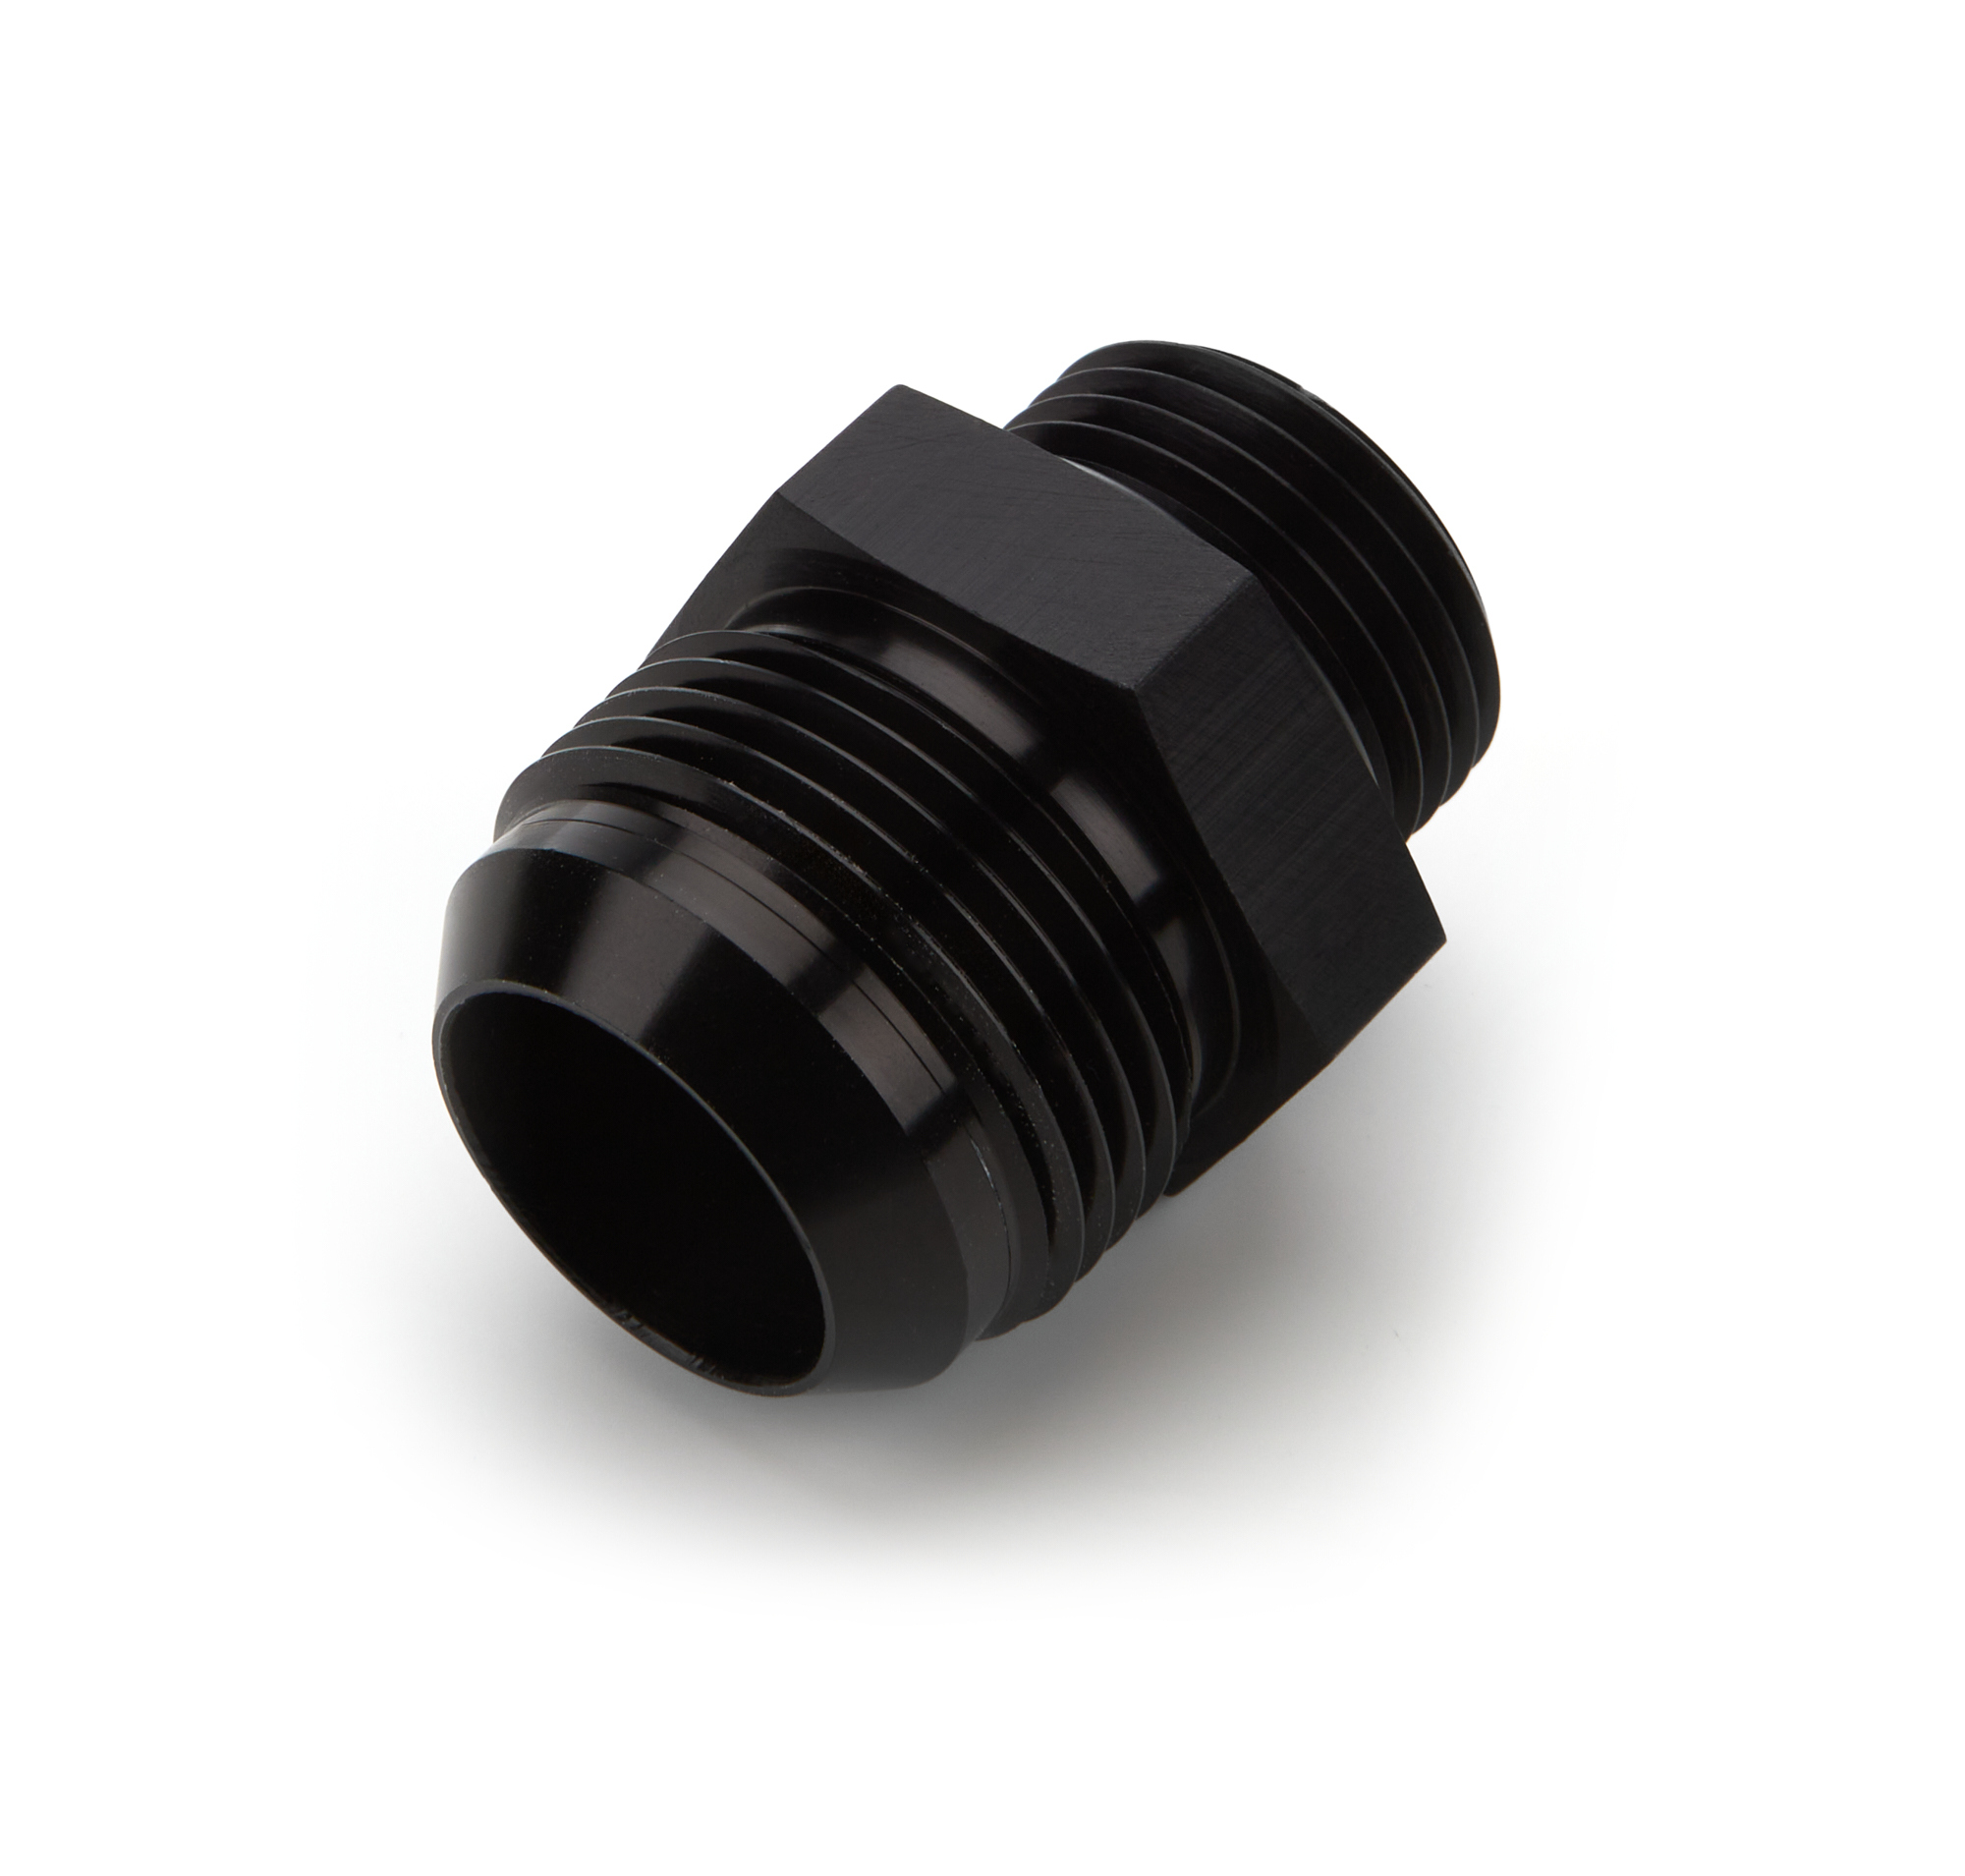 Peterson Fluid 08-0503 Fitting, Adapter, Straight, 16 AN Male to 12 AN Male O-Ring, Aluminum, Black Anodized, Each